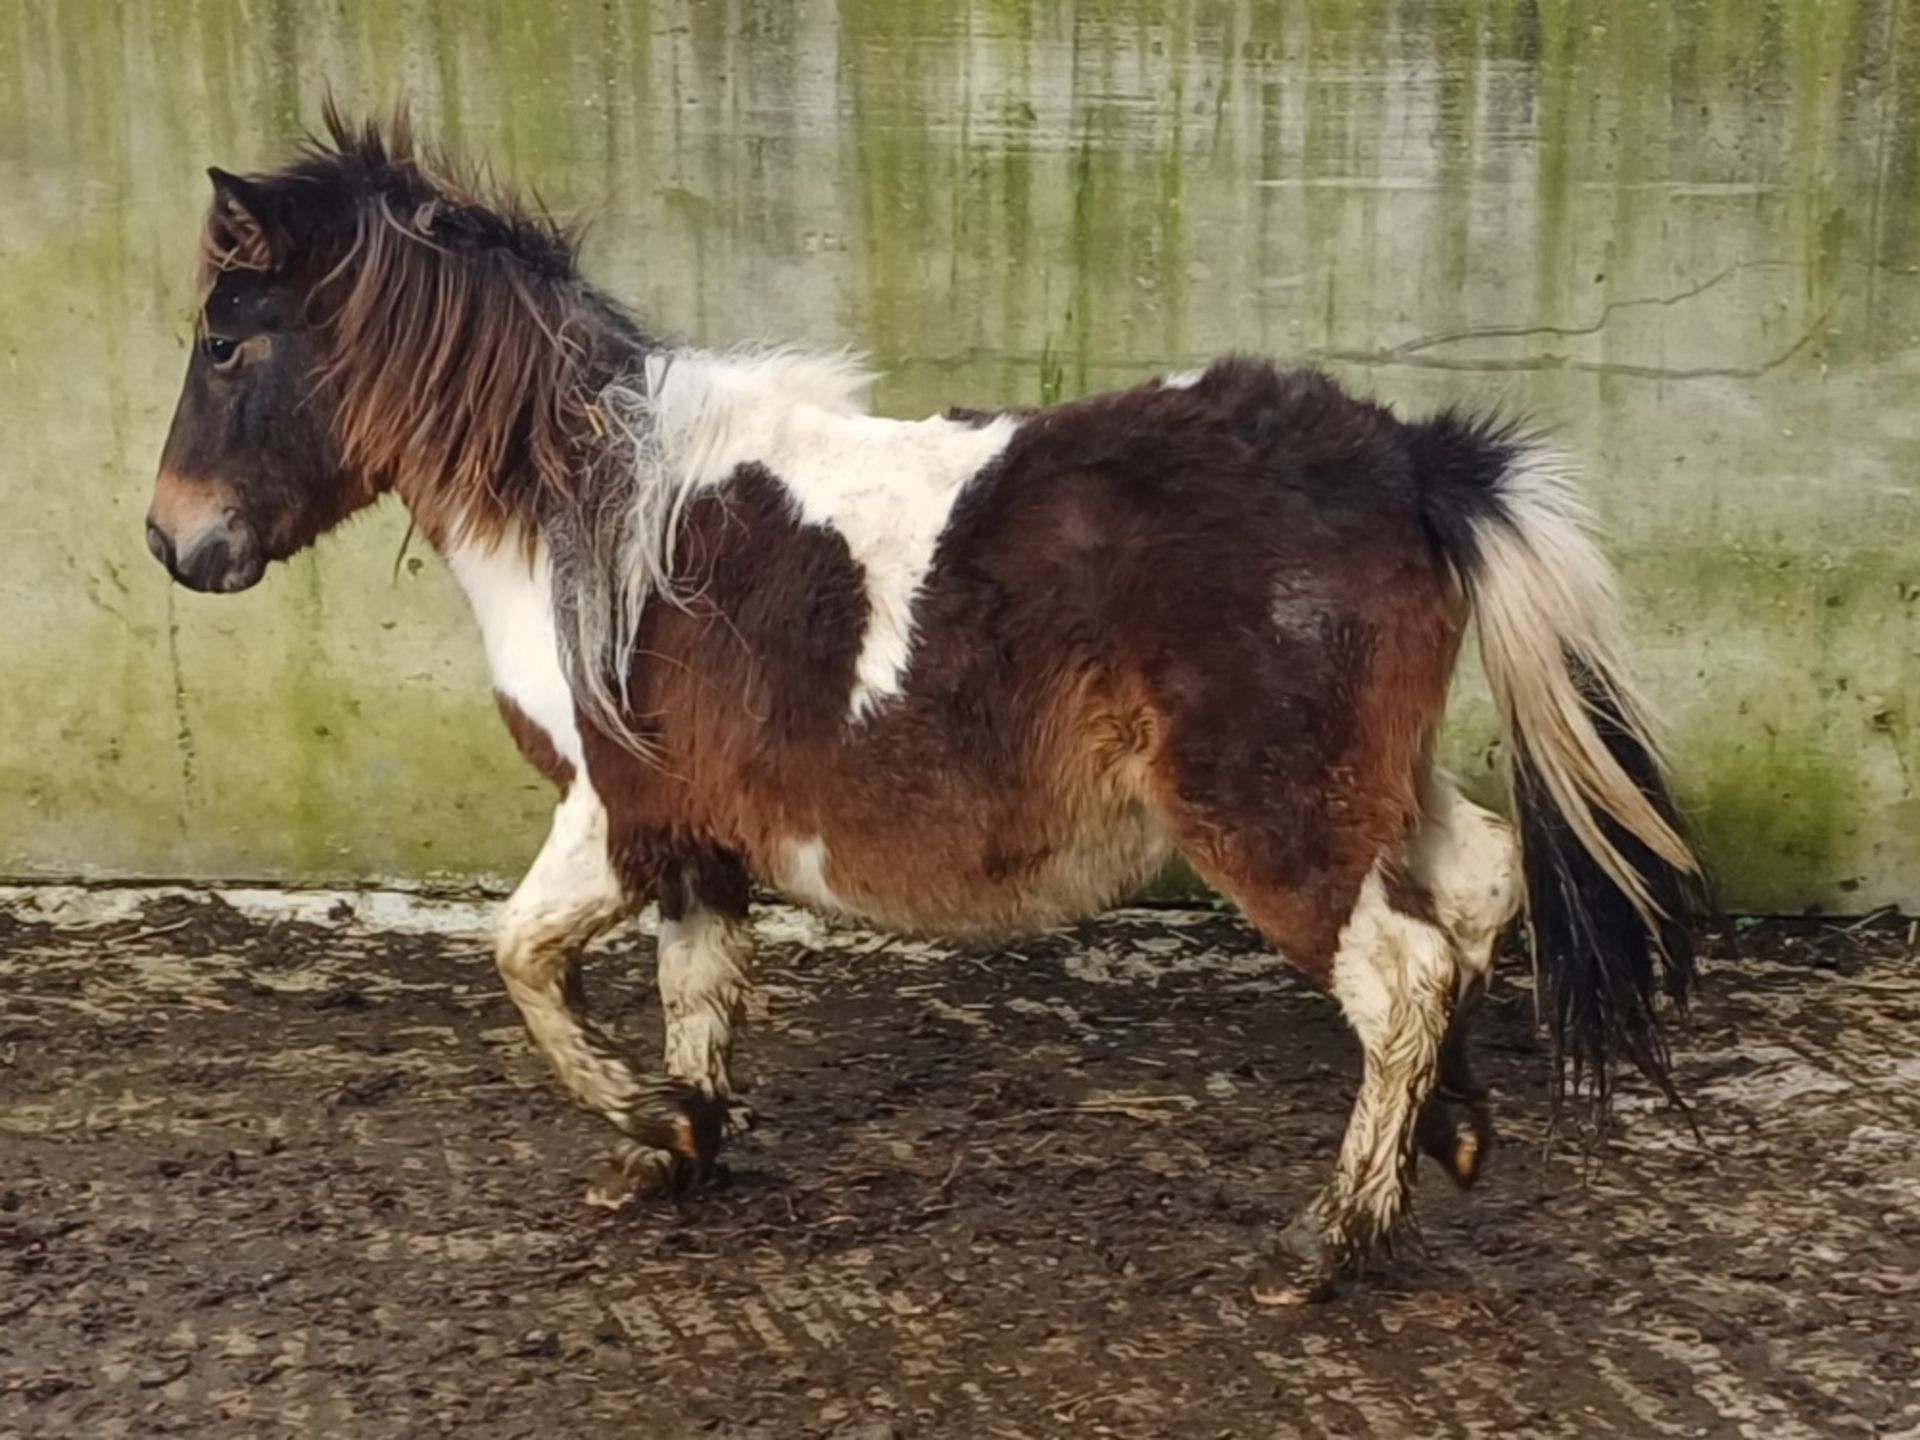 'GODSWORTHY SPICE' DARTMOOR HILL PONY SKEWBALD COLT APPROX 18 MONTHS OLD - Image 4 of 12